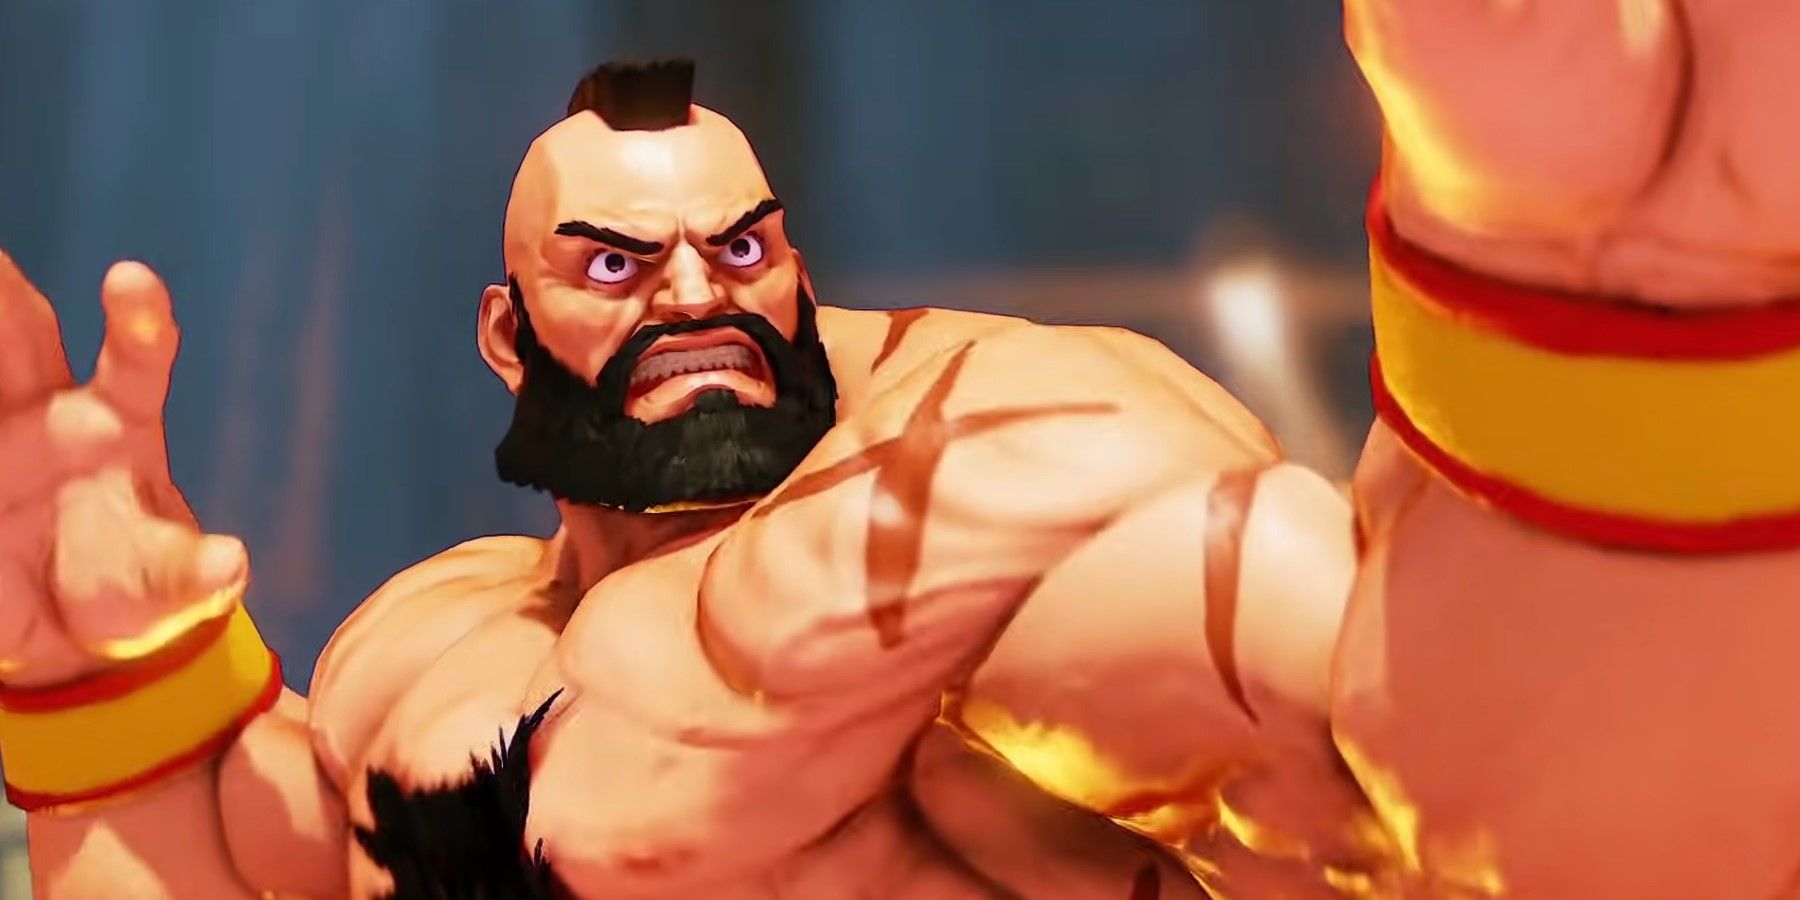 Zangief scowling at the opponent with his arms up